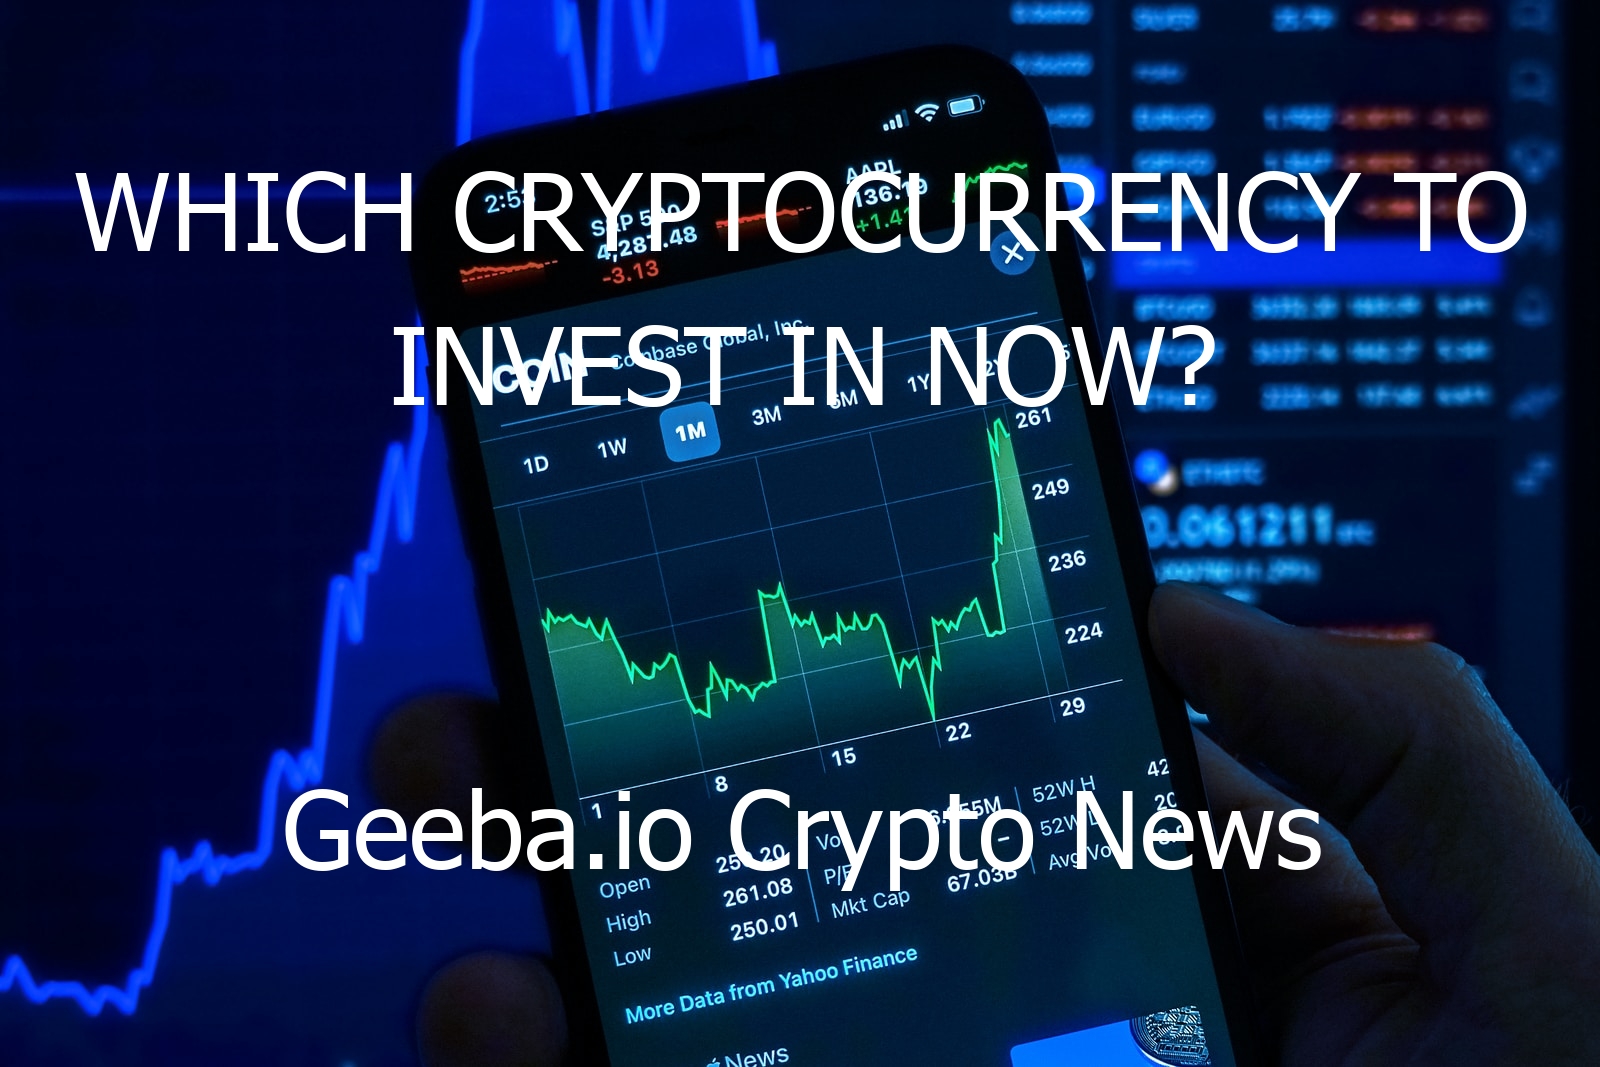 which cryptocurrency to invest in now 3267